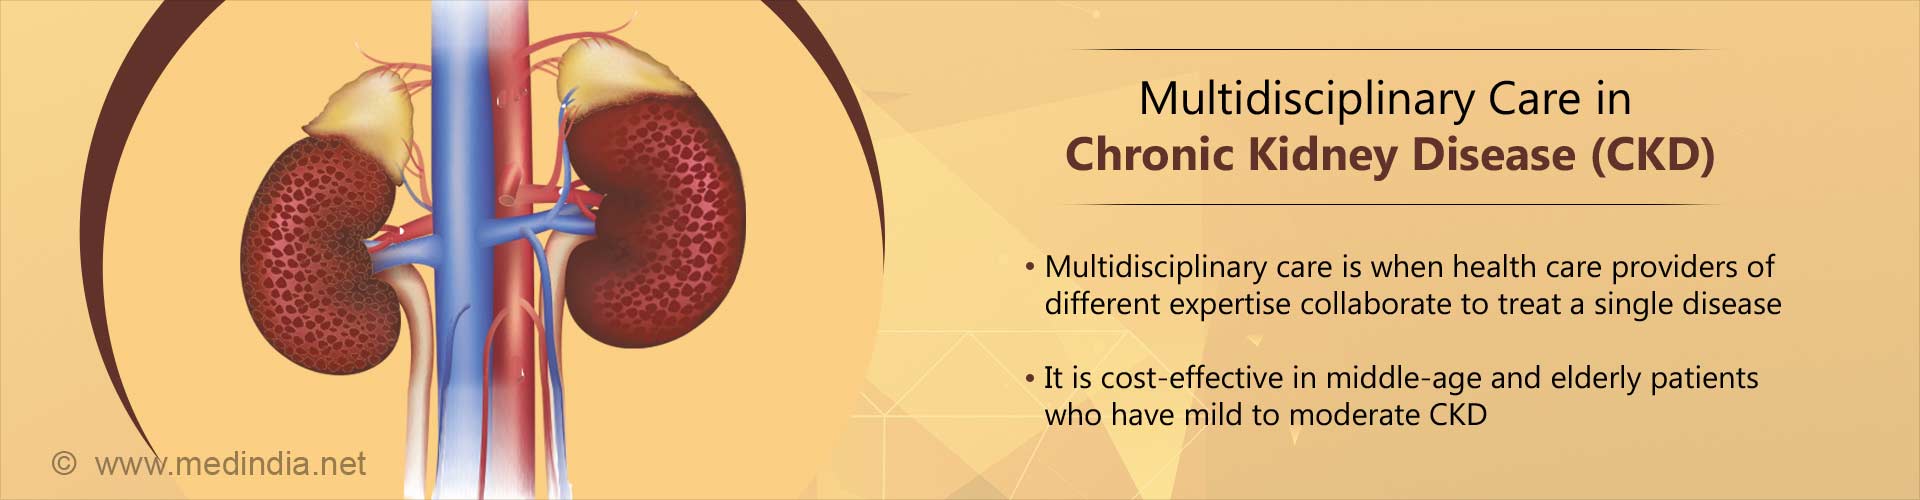 multidiscipline care in chronic kidney disease (CKD)
- multidisciplinary are in when health care providers of different expertise collaborate to treat a single disease
- it is cost-effective in middle-age and elderly patients who have mild to moderate CKD